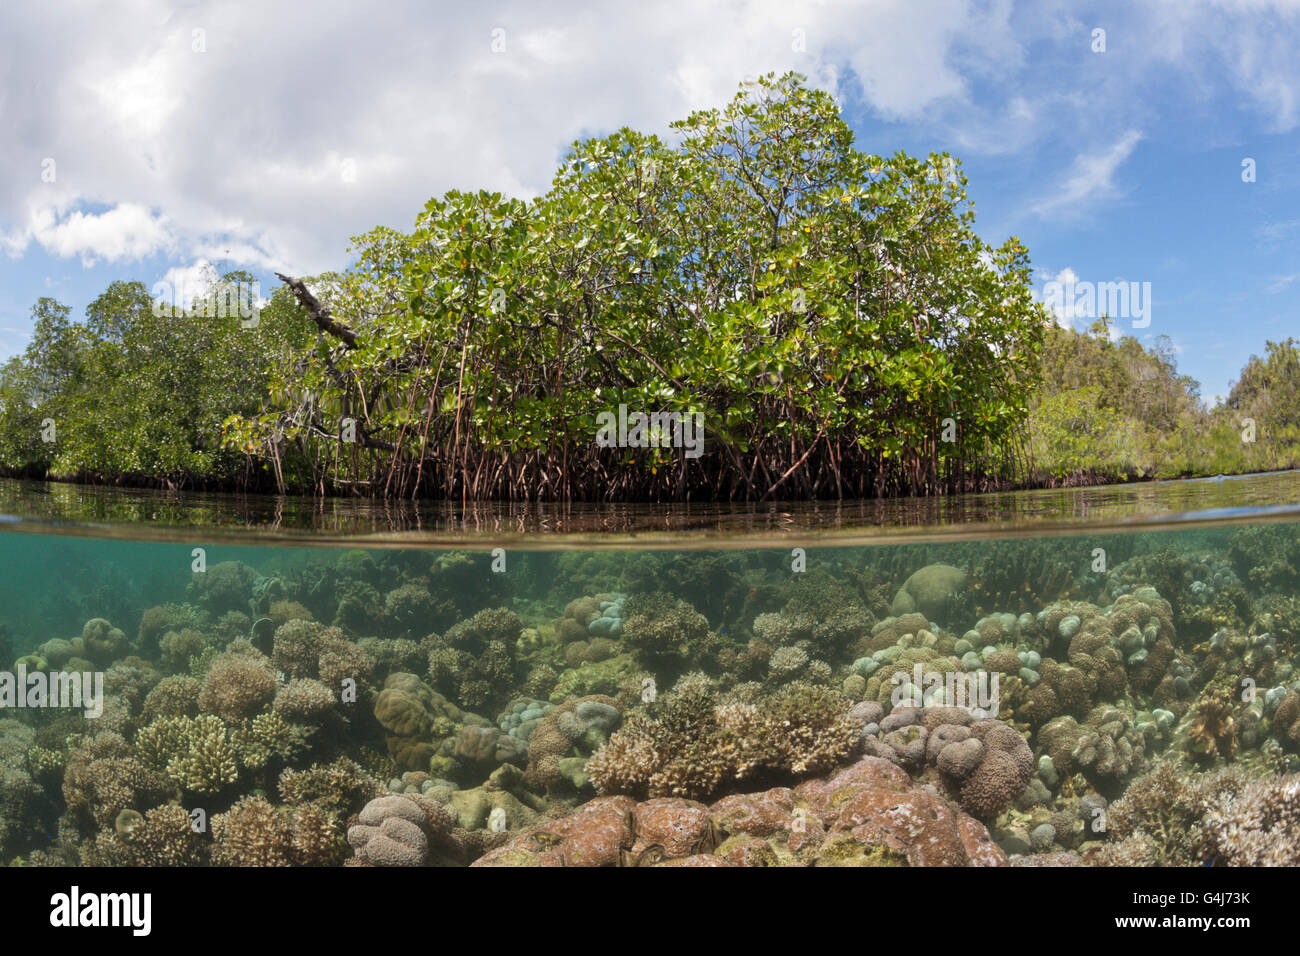 Corals growing under Mangroves, Raja Ampat, West Papua, Indonesia Stock Photo